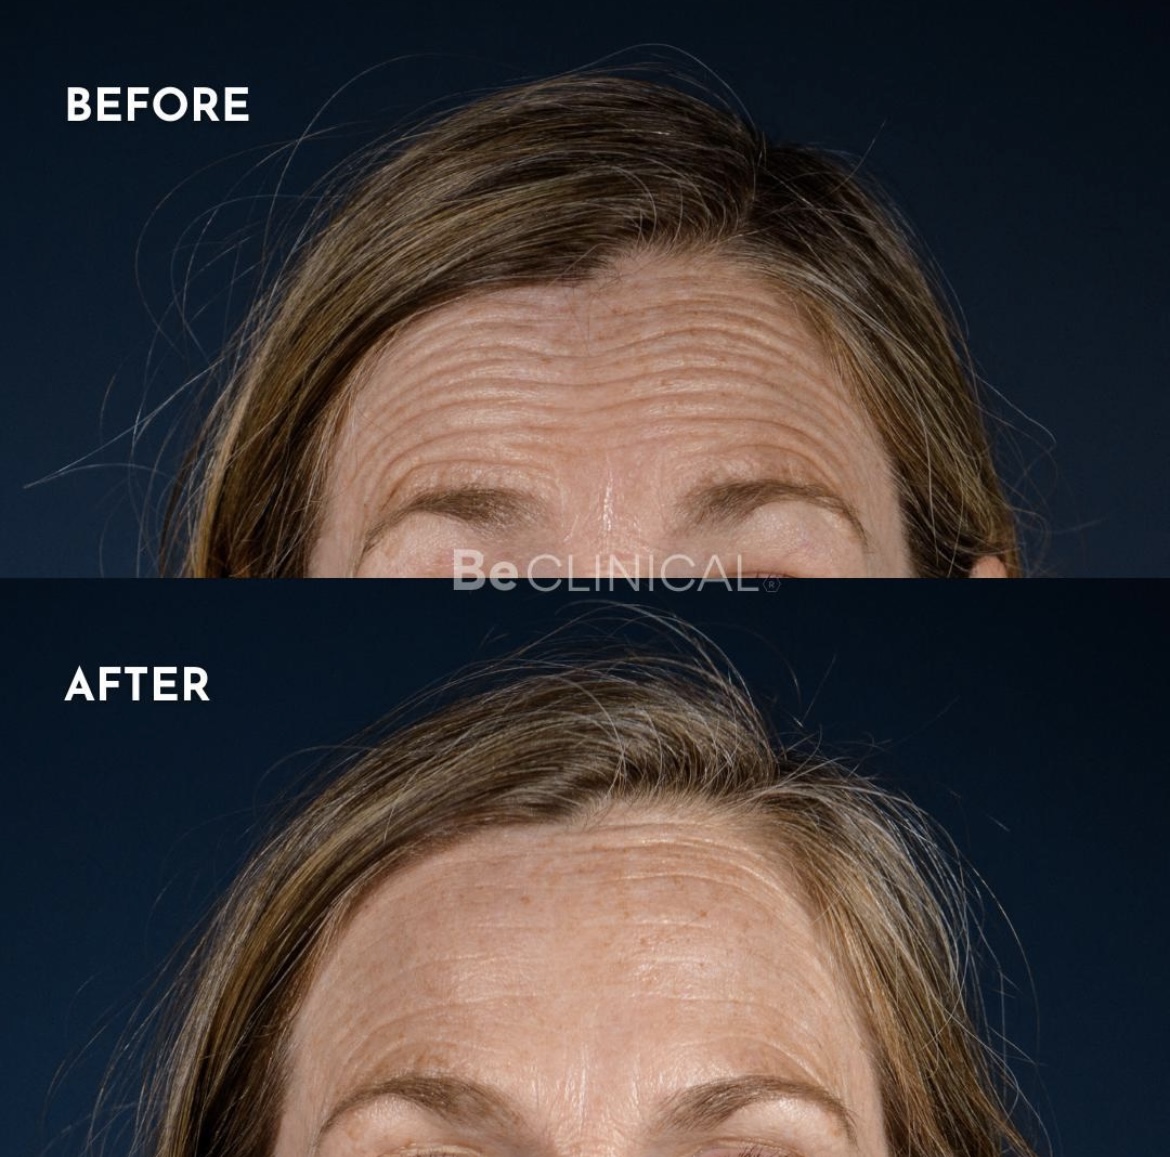 dysport-forehead-before-after-be-clinical